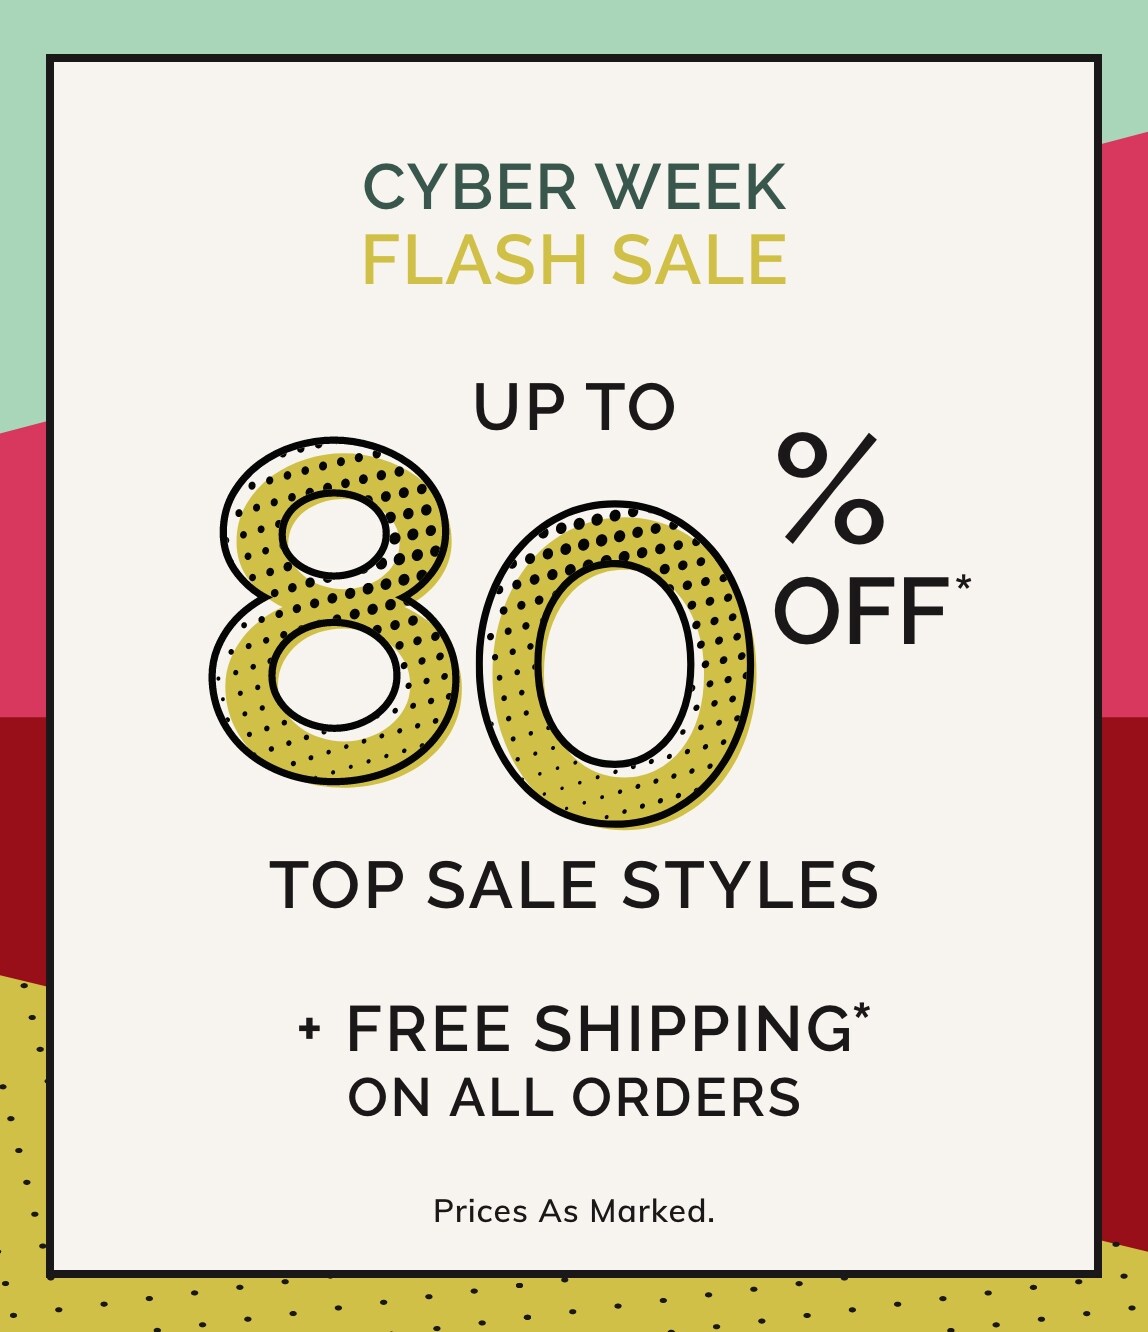 UP TO 80% OFF* TOP SALE STYLES + FREE SHIPPING ON ALL ORDERS**